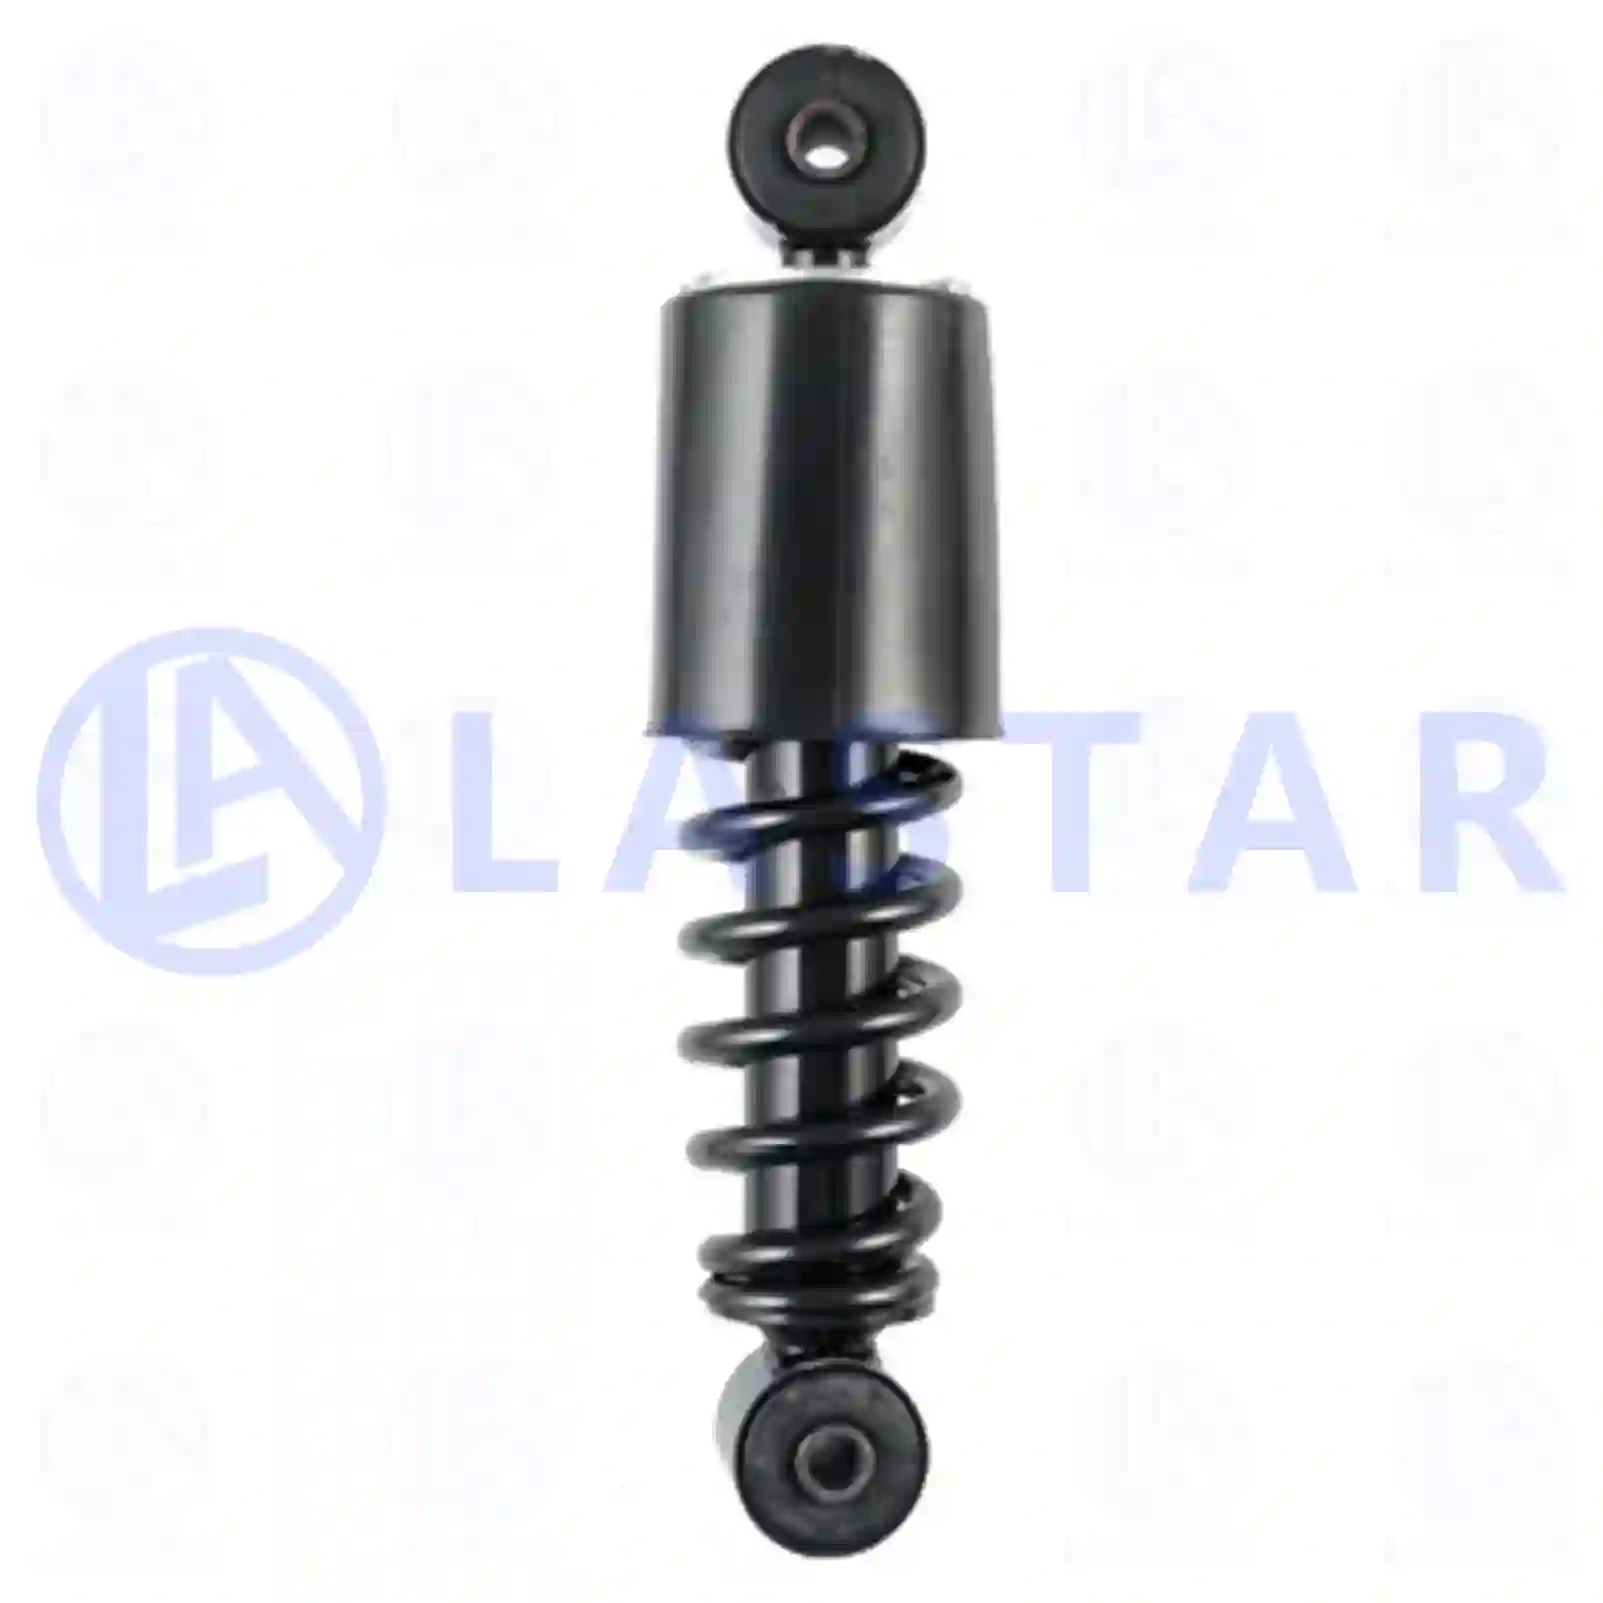 Cabin shock absorber, 77734913, 9438903319, 9438903419, , ||  77734913 Lastar Spare Part | Truck Spare Parts, Auotomotive Spare Parts Cabin shock absorber, 77734913, 9438903319, 9438903419, , ||  77734913 Lastar Spare Part | Truck Spare Parts, Auotomotive Spare Parts